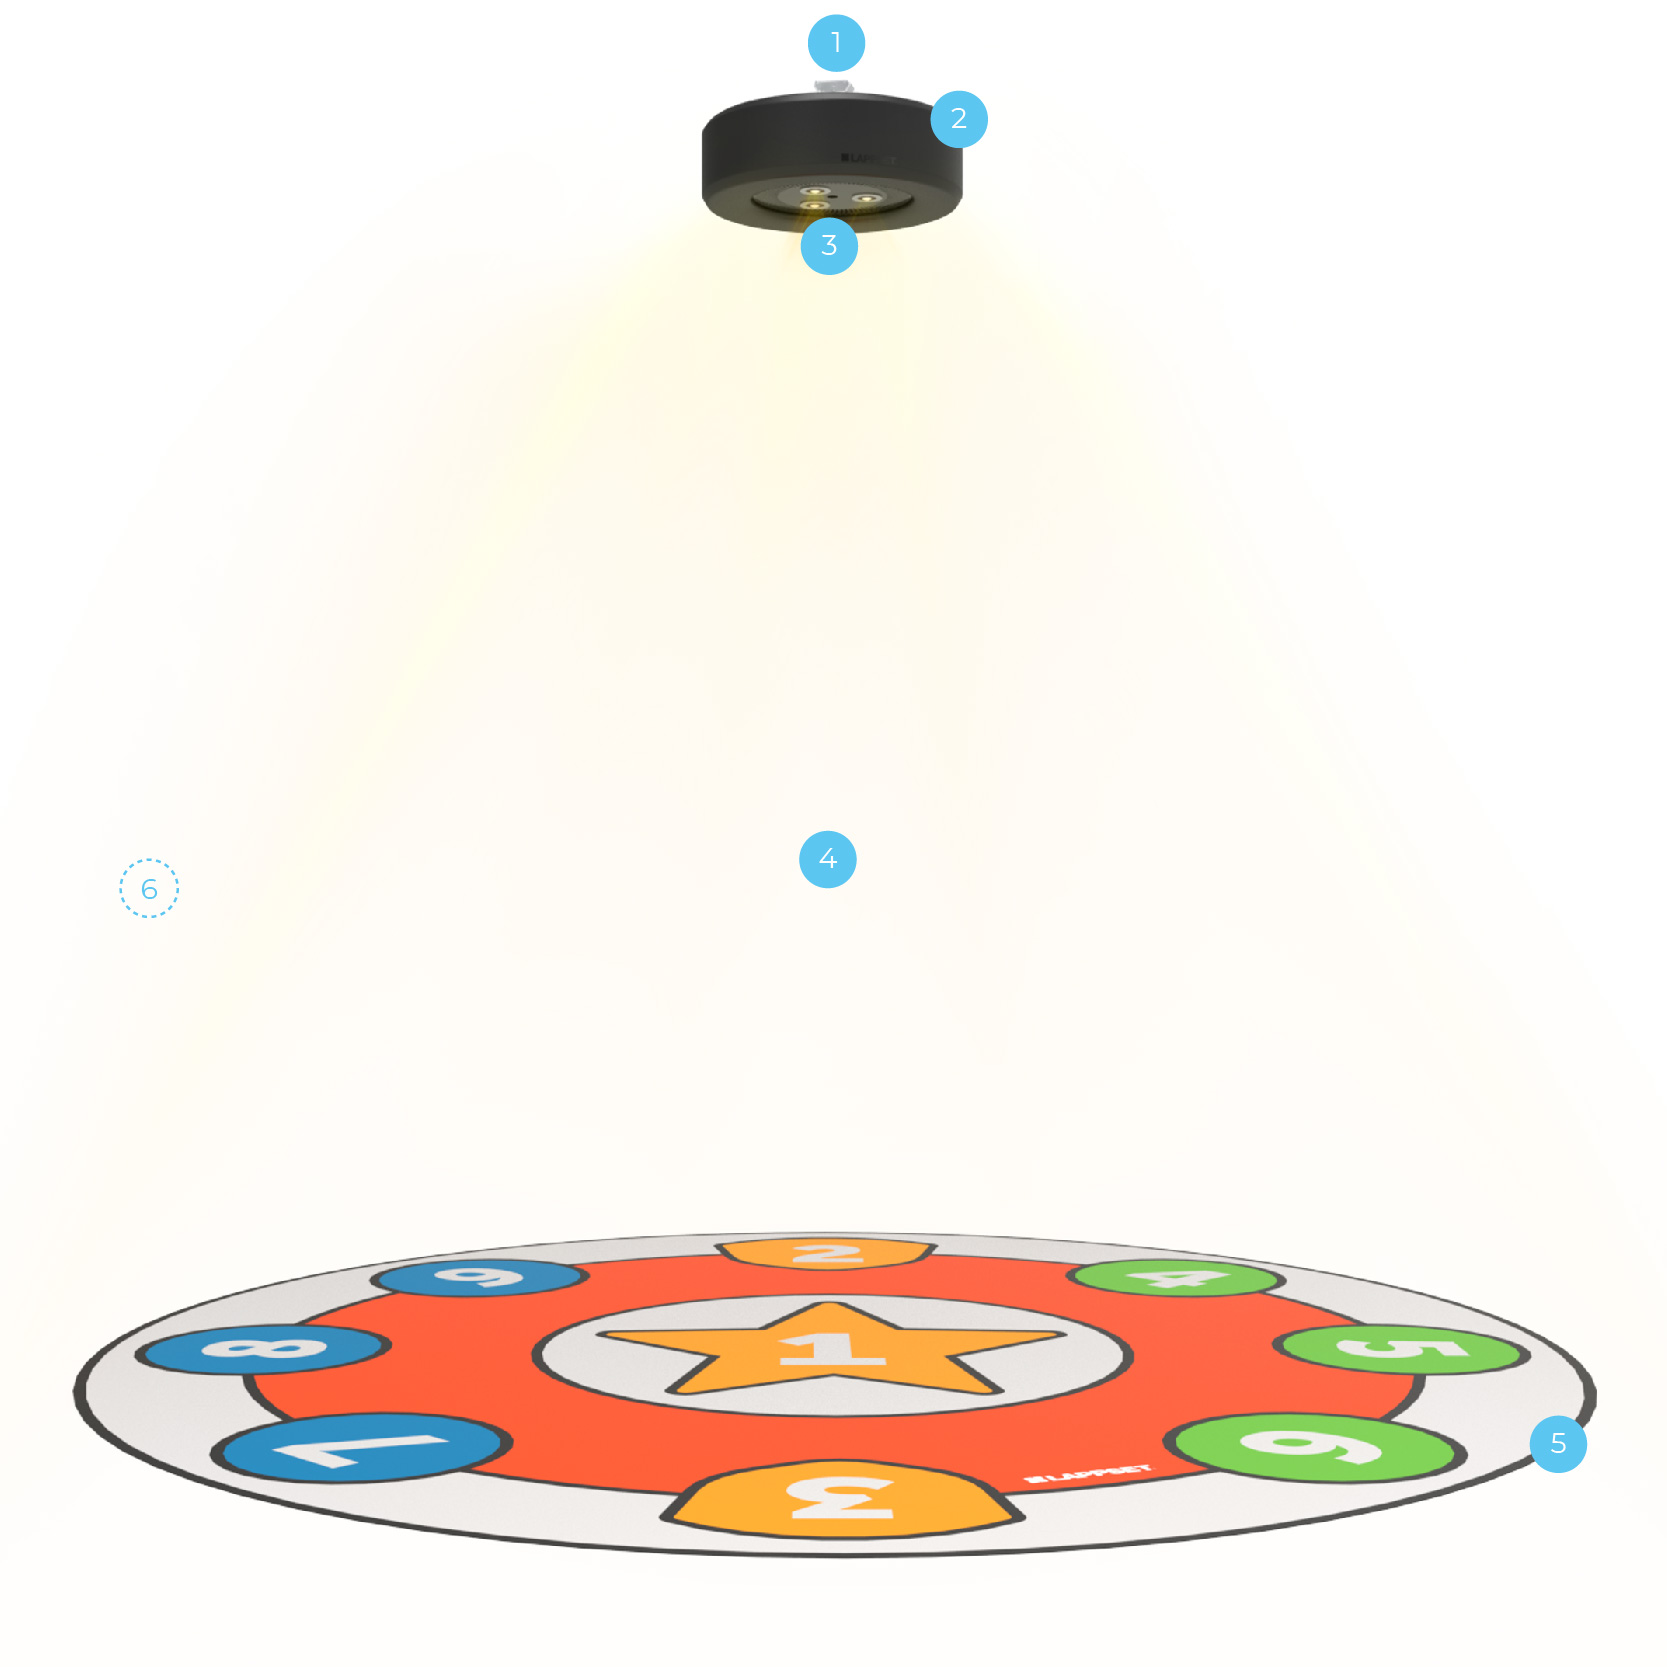 Circular interactive play mat with numbered, colored sections from 1 to 9. It is illuminated from above by a ceiling-mounted sensor light positioned directly above the mat. The central section of the mat features a star icon.